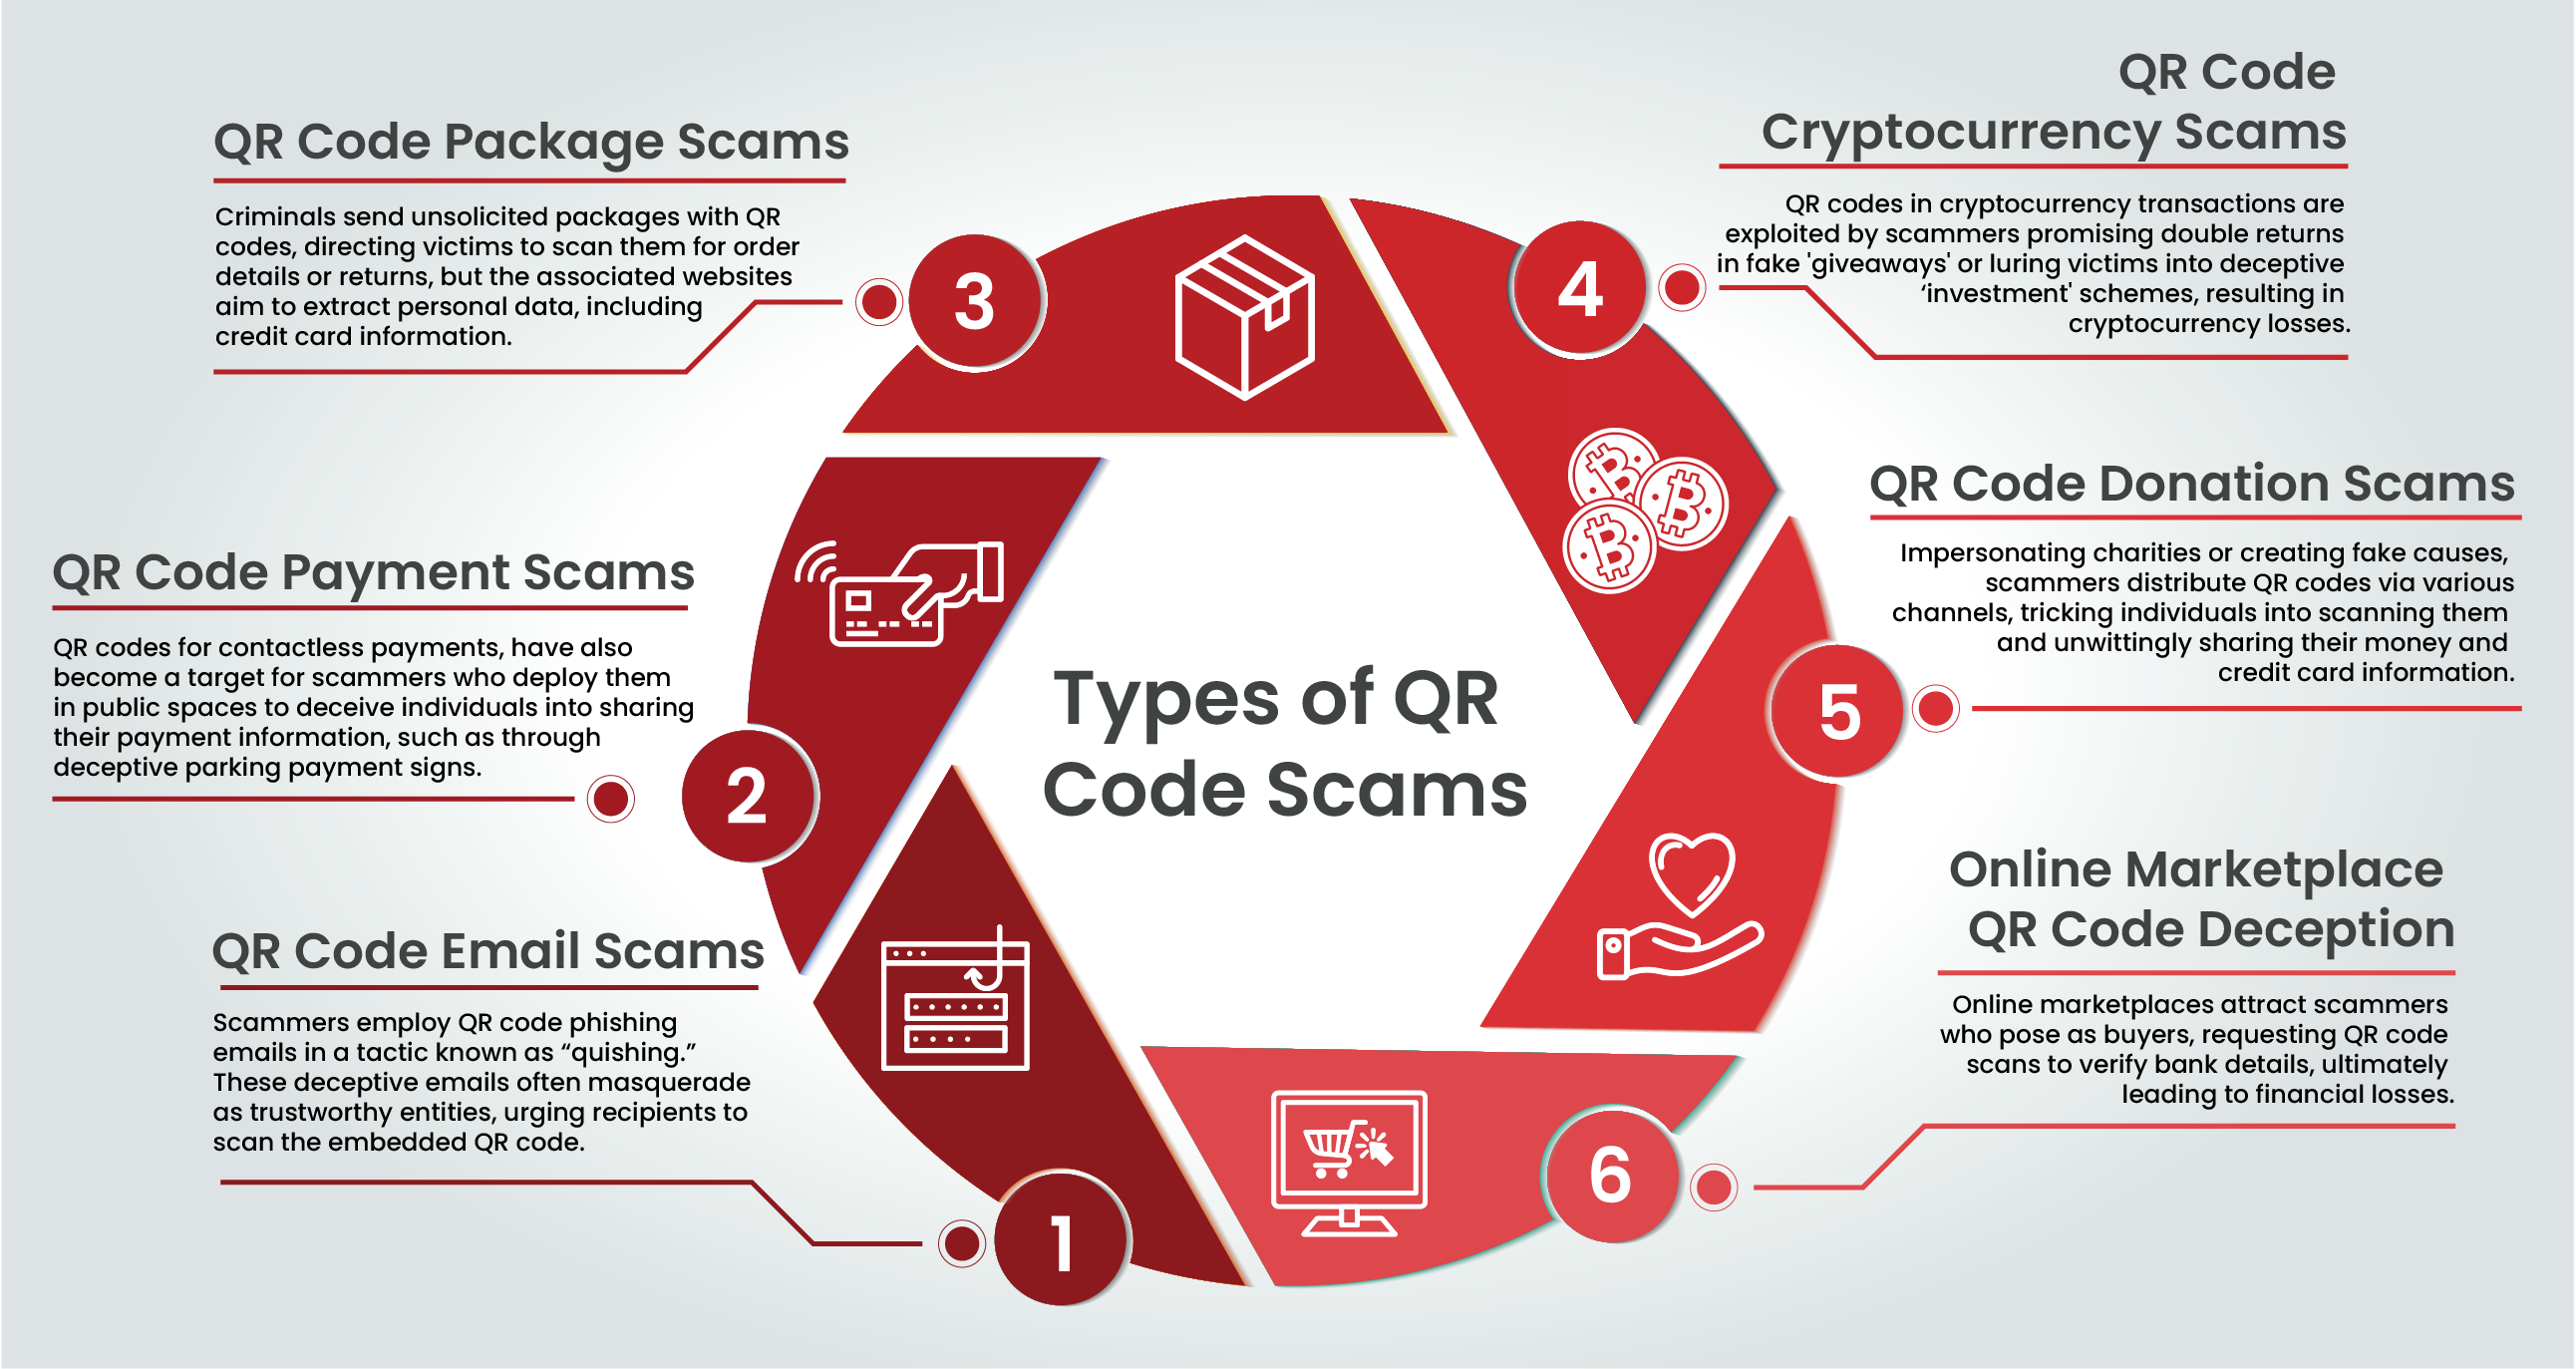 Types of QR Code Scams